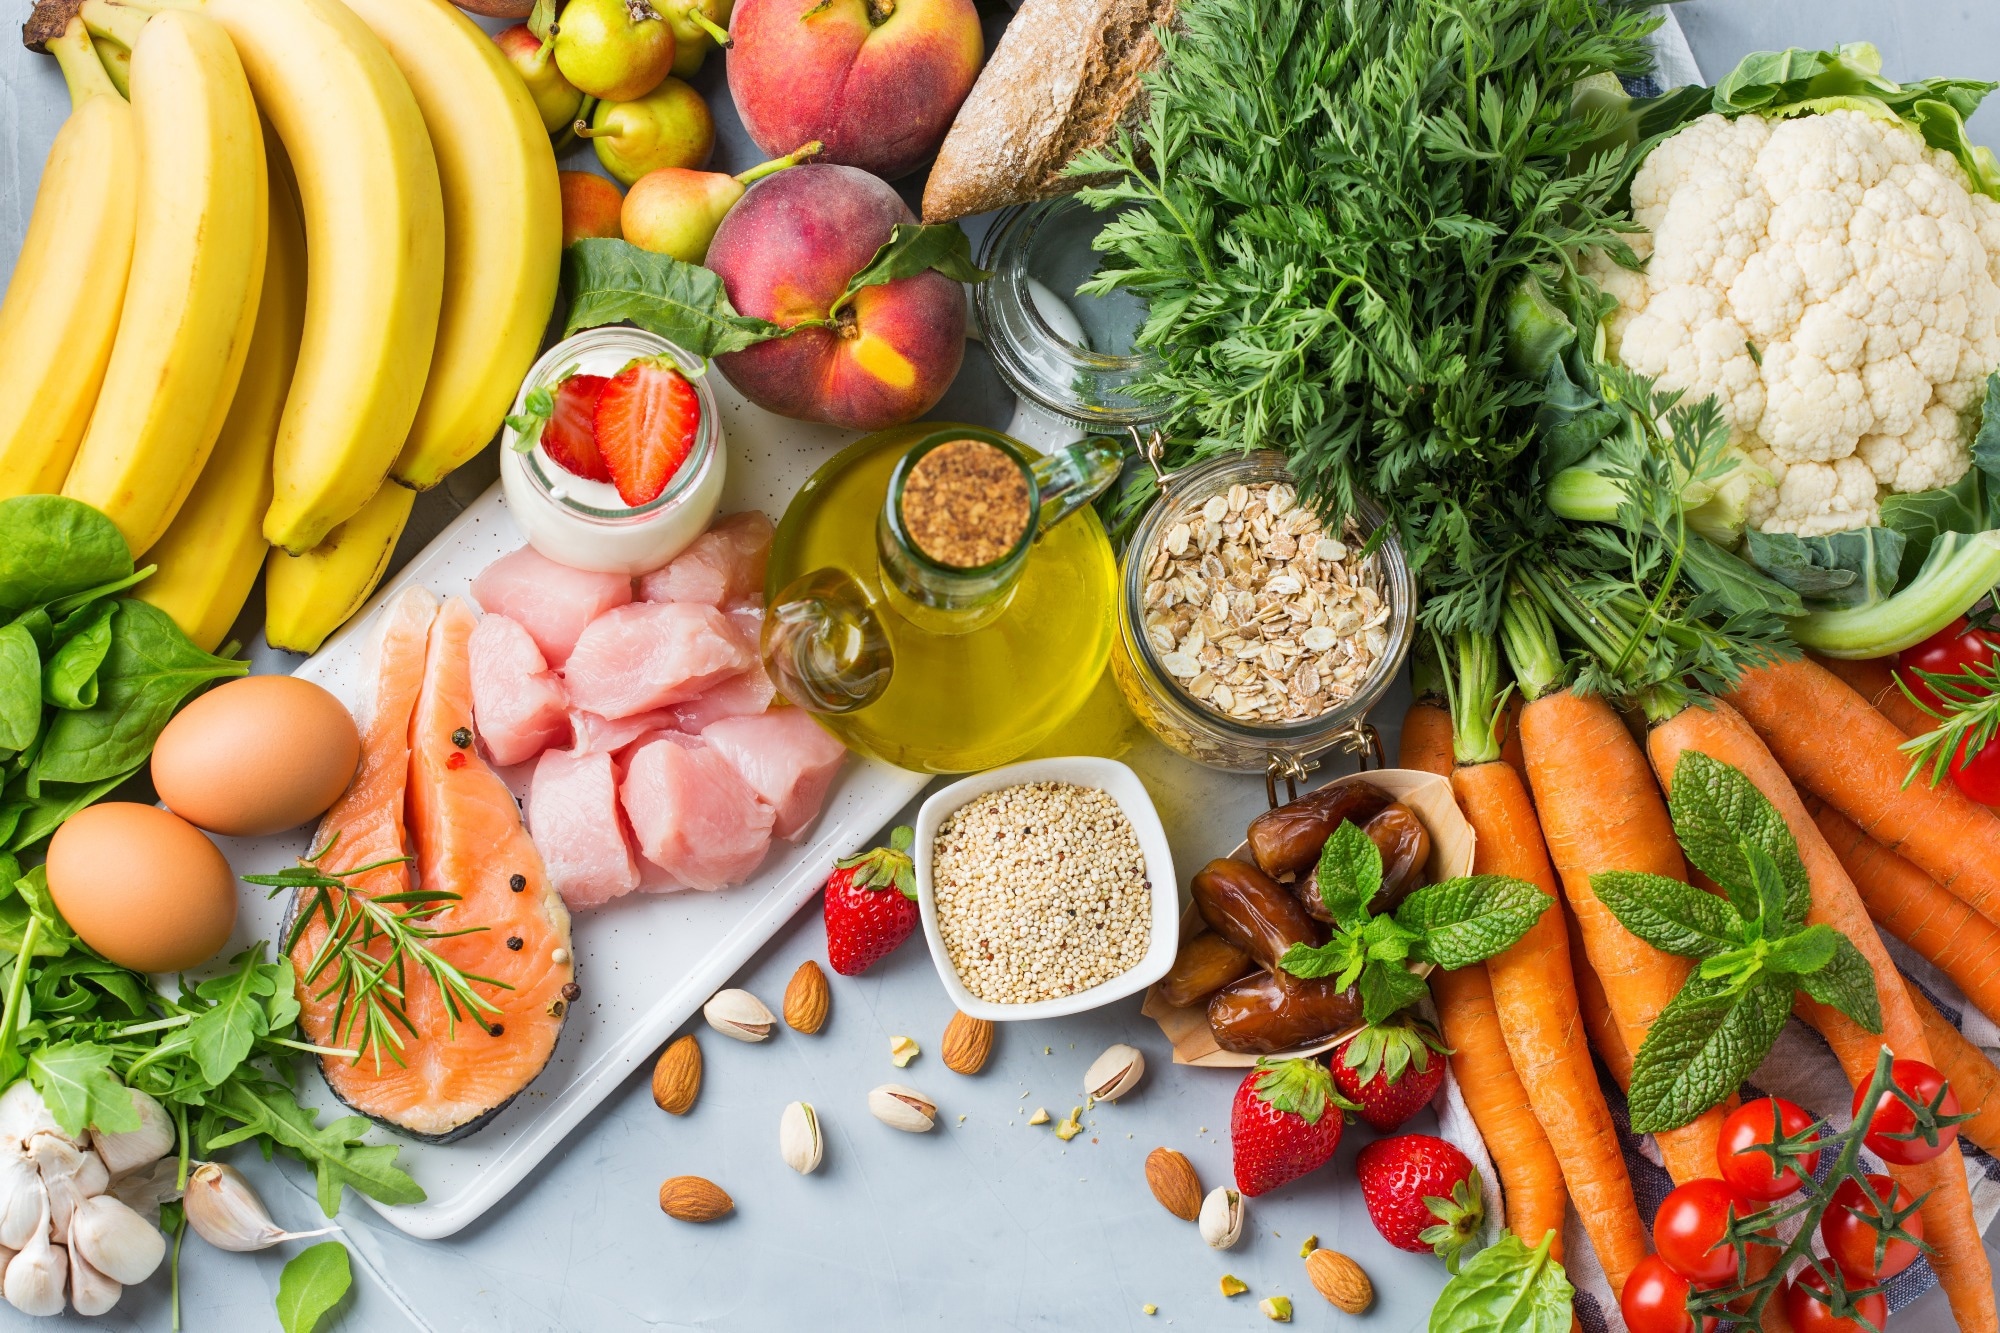 Study: Effects of a Mediterranean Diet Intervention on Maternal Stress, Well-Being, and Sleep Quality throughout Gestation—The IMPACT-BCN Trial. Image Credit: Antonina Vlasova / Shutterstock.com